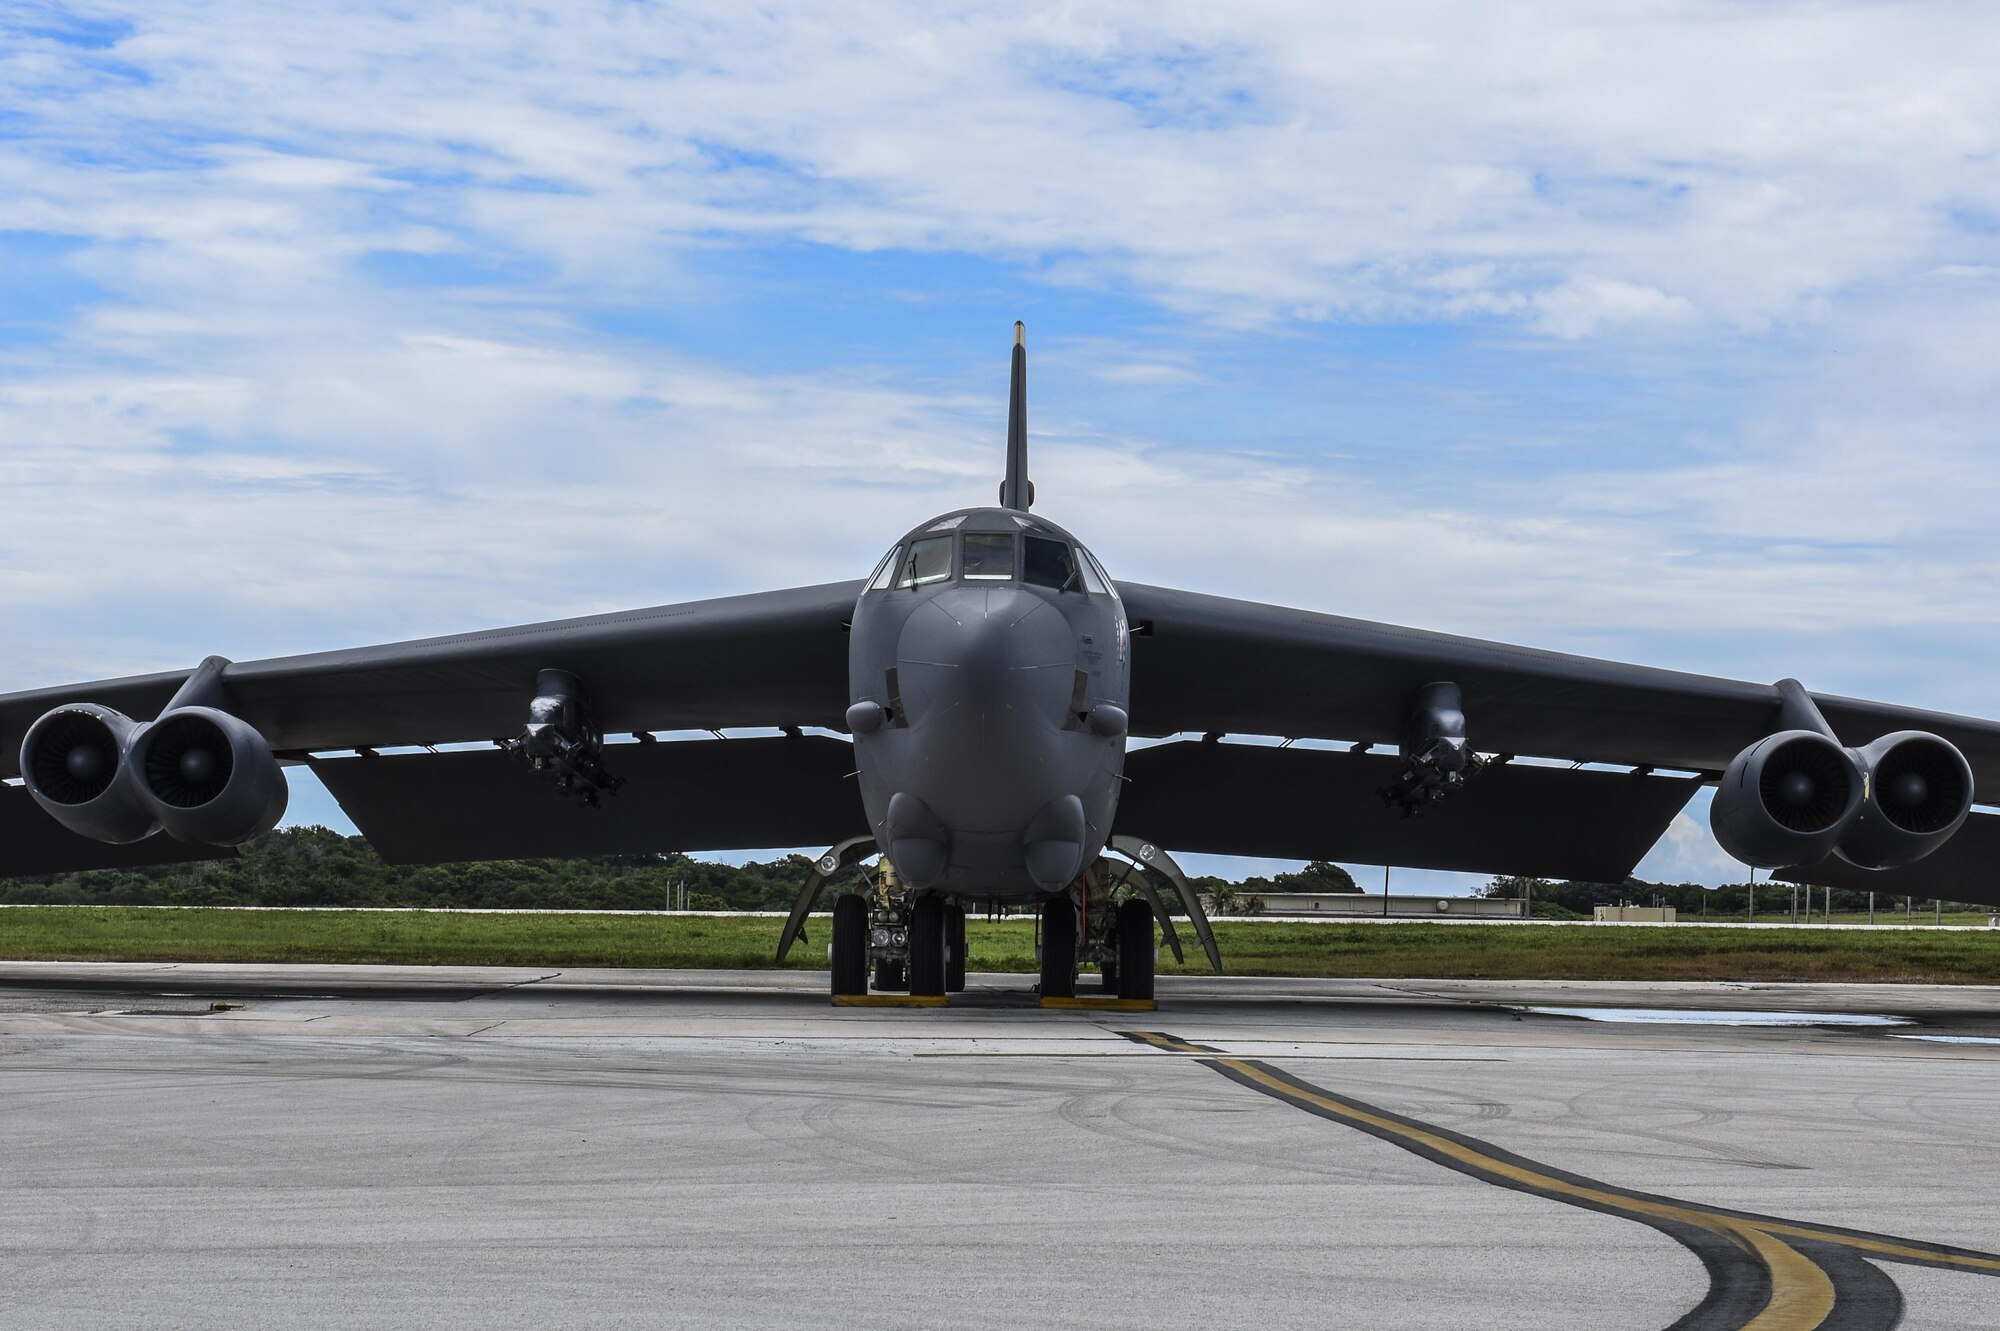 A B-52 Stratofortress sits on the flightline at Andersen Air Force Base, Guam, Aug.10, 2016. The B-52 was recently replaced by the B-1 Lancer, which arrived at Andersen Aug. 6, in support of the U.S. Strategic Command Continuous Bomber Presence mission. The CBP bomber swap between the B-1 and B-52 is occurring throughout the month of August as the B-1s return to support this mission for the first time since April 2006. The CBP mission is part of a long-standing history of maintaining a consistent bomber presence in the Indo-Asia-Pacific in order to maintain regional stability, and provide assurance to our allies and partners in the region. (U.S. Air Force photo by Tech. Sgt. Richard Ebensberger)